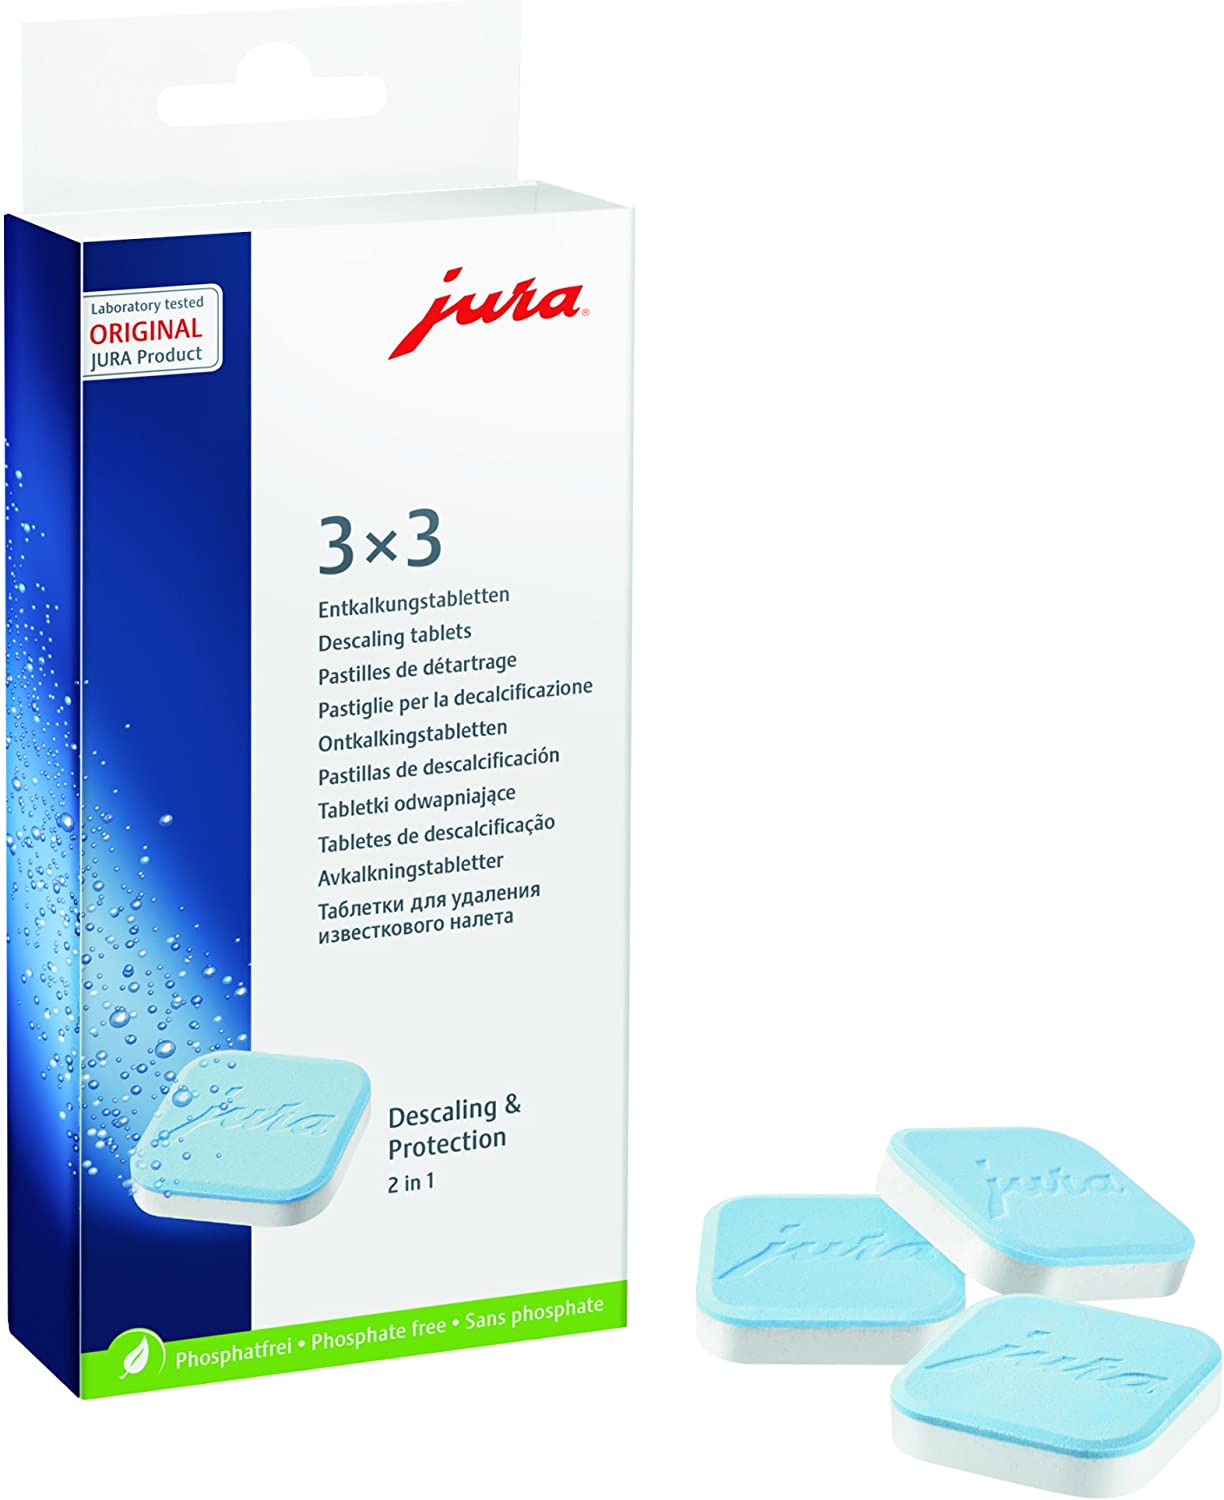 Jura Decalcifying Tablets 3x3 (9 pieces)